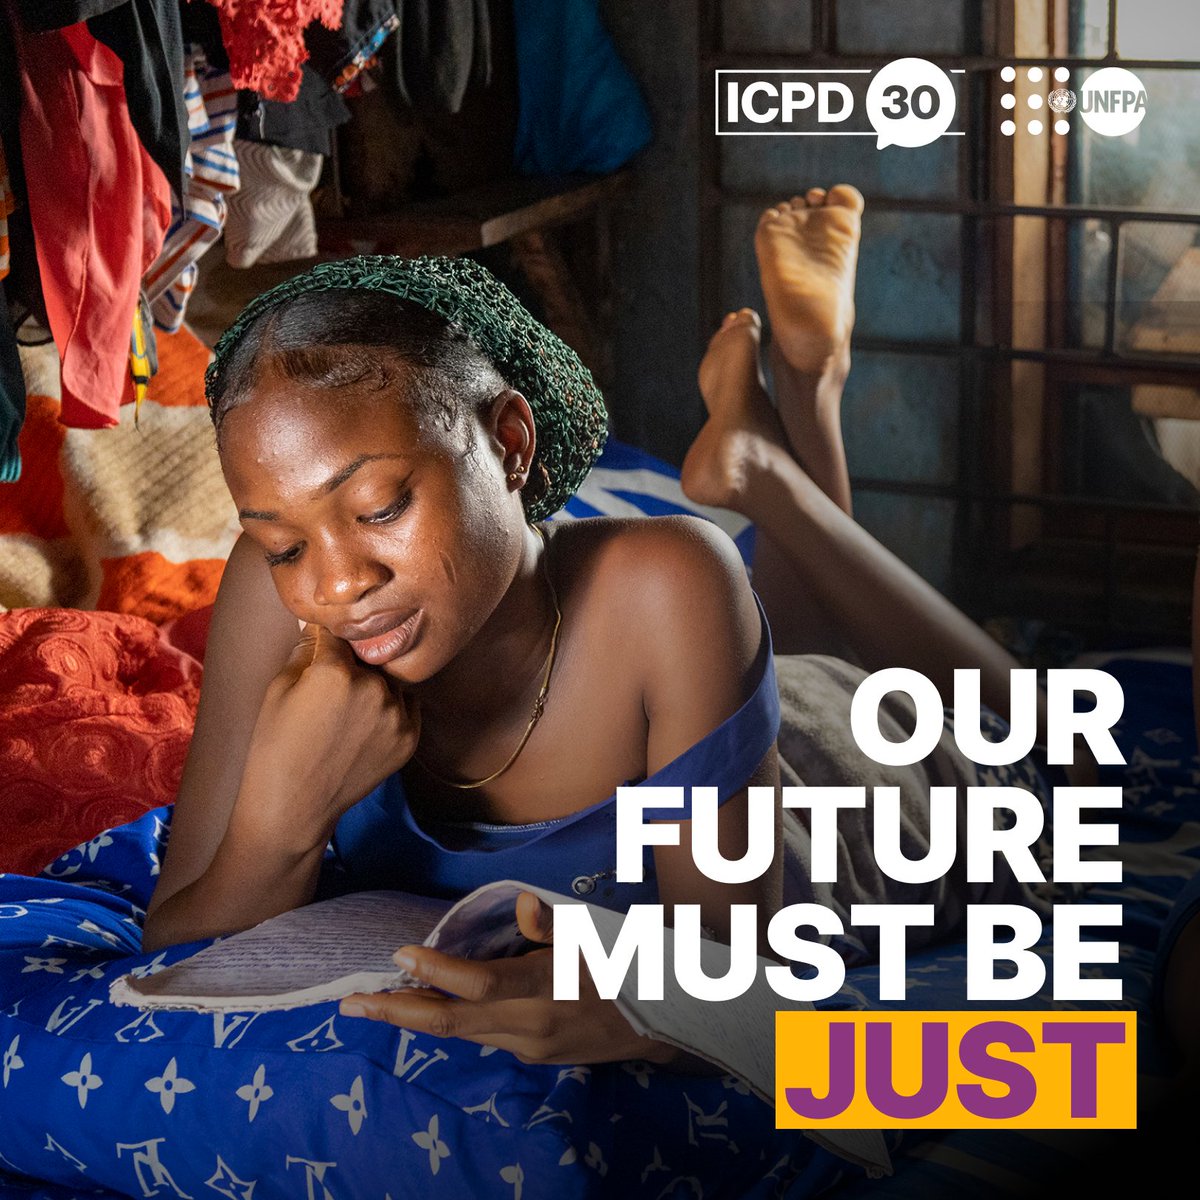 This week’s #CPD57 reminds us that we need to build inclusive societies that provide equal access to justice. See how @UNFPA—the @UN sexual and reproductive health agency—is working for #OurCommonFuture: unf.pa/cpd57 #ICPD30